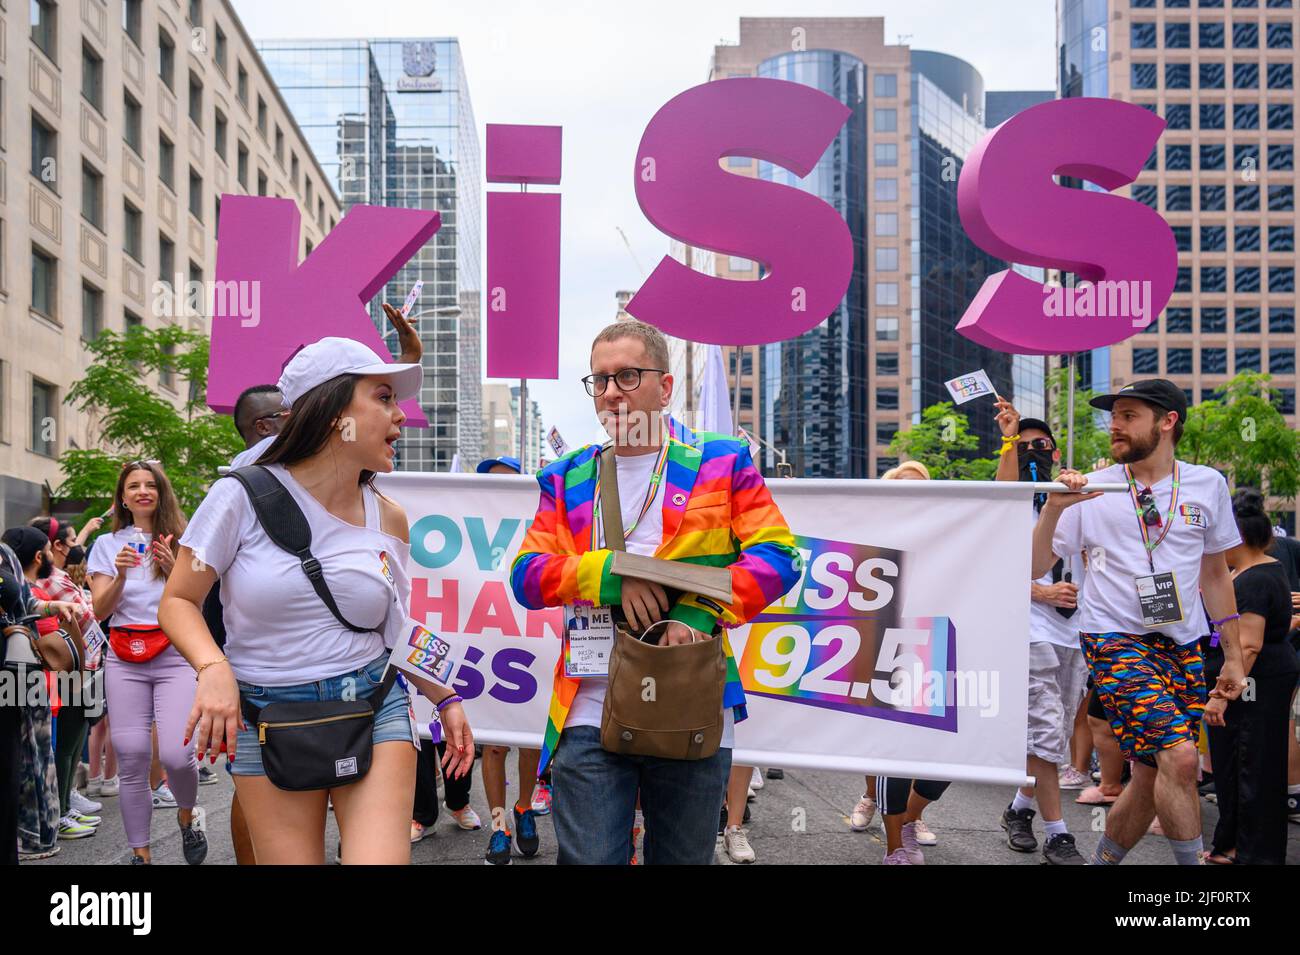 Maurie Sherman (rainbow jacket) from Kiss 92.5 radio station marches in Bloor St. during Pride Parade Stock Photo